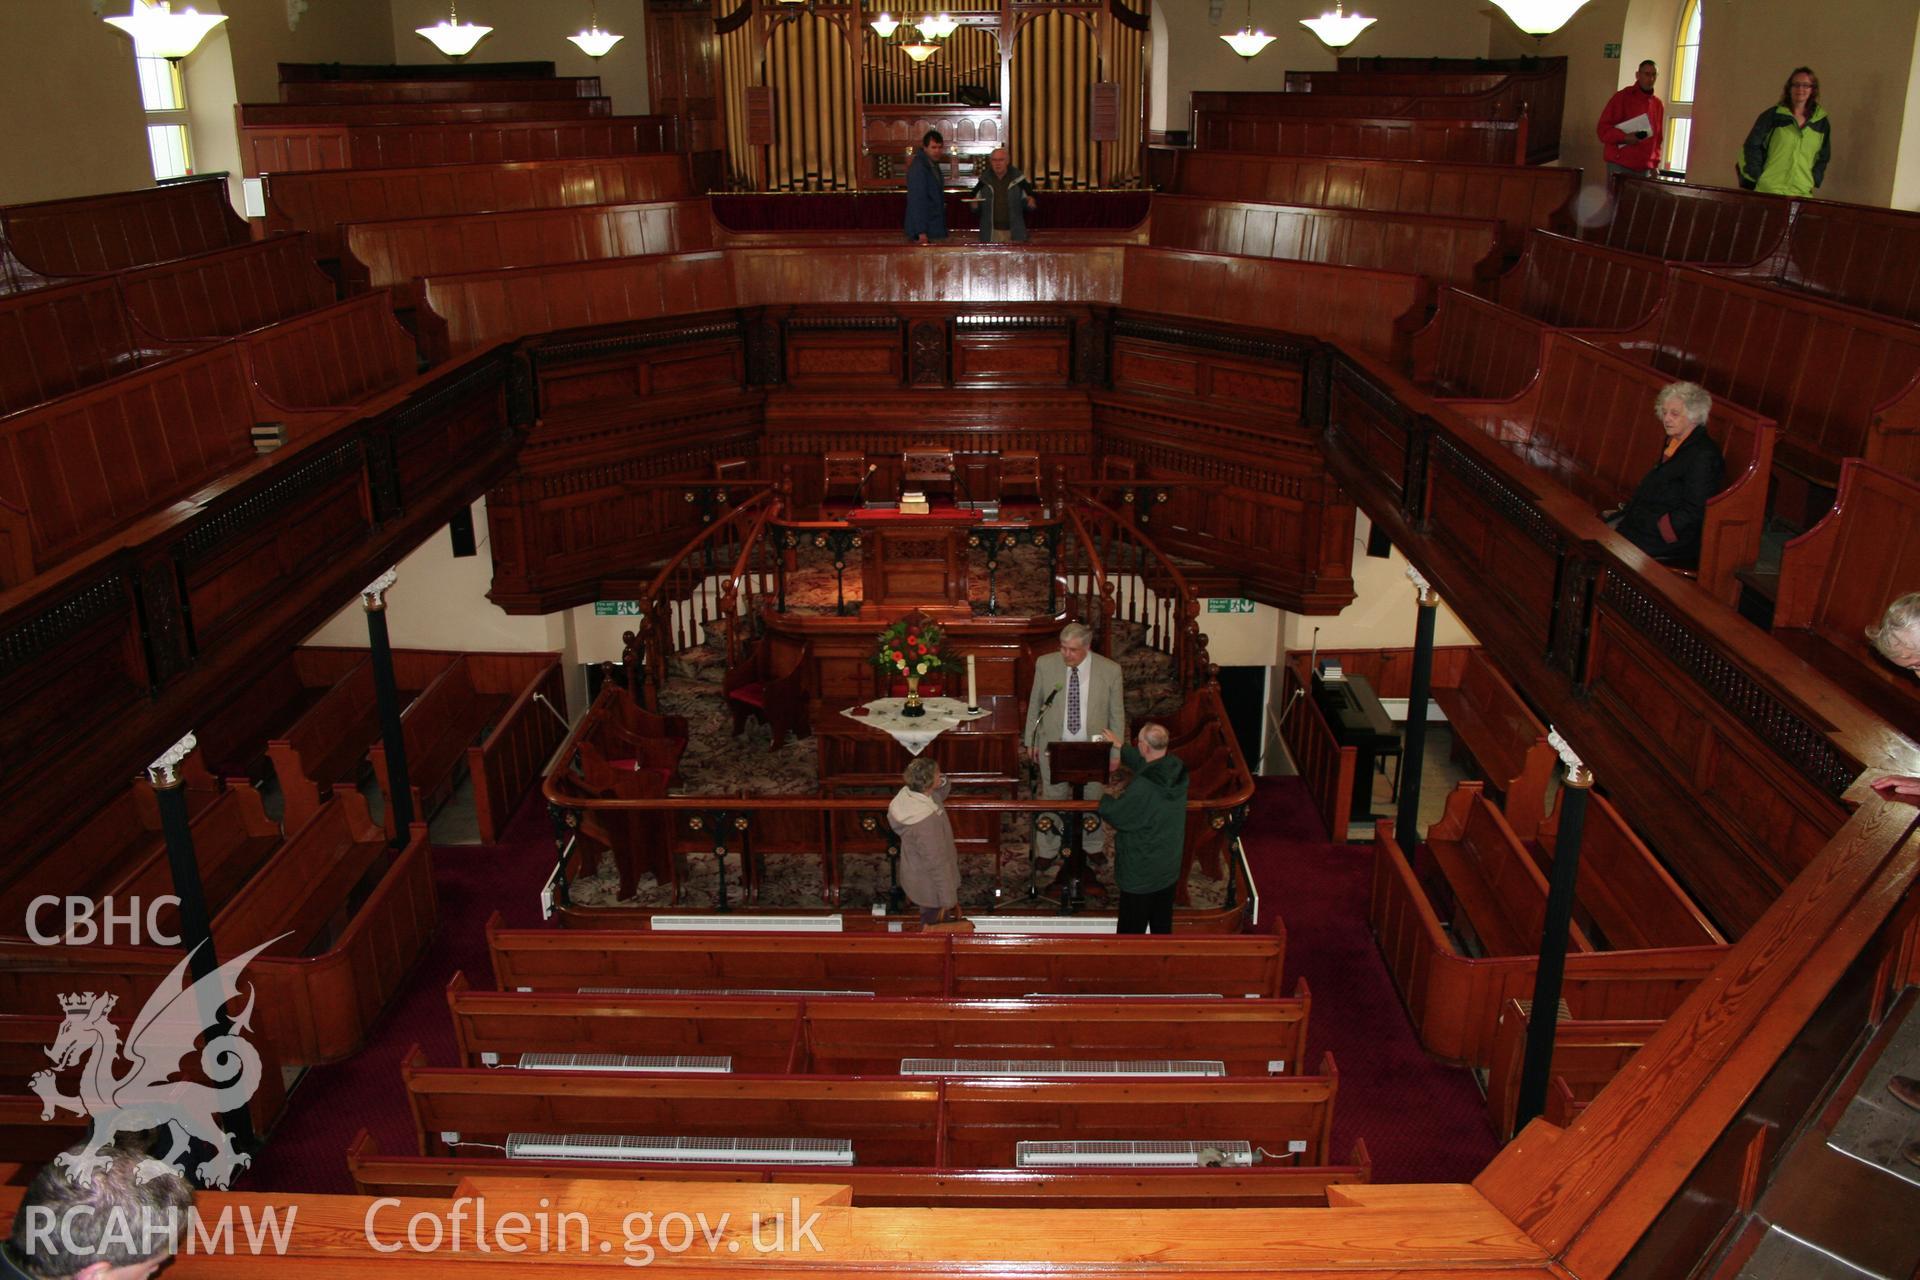 Internal, view from gallery of pulpit & sedd fawr